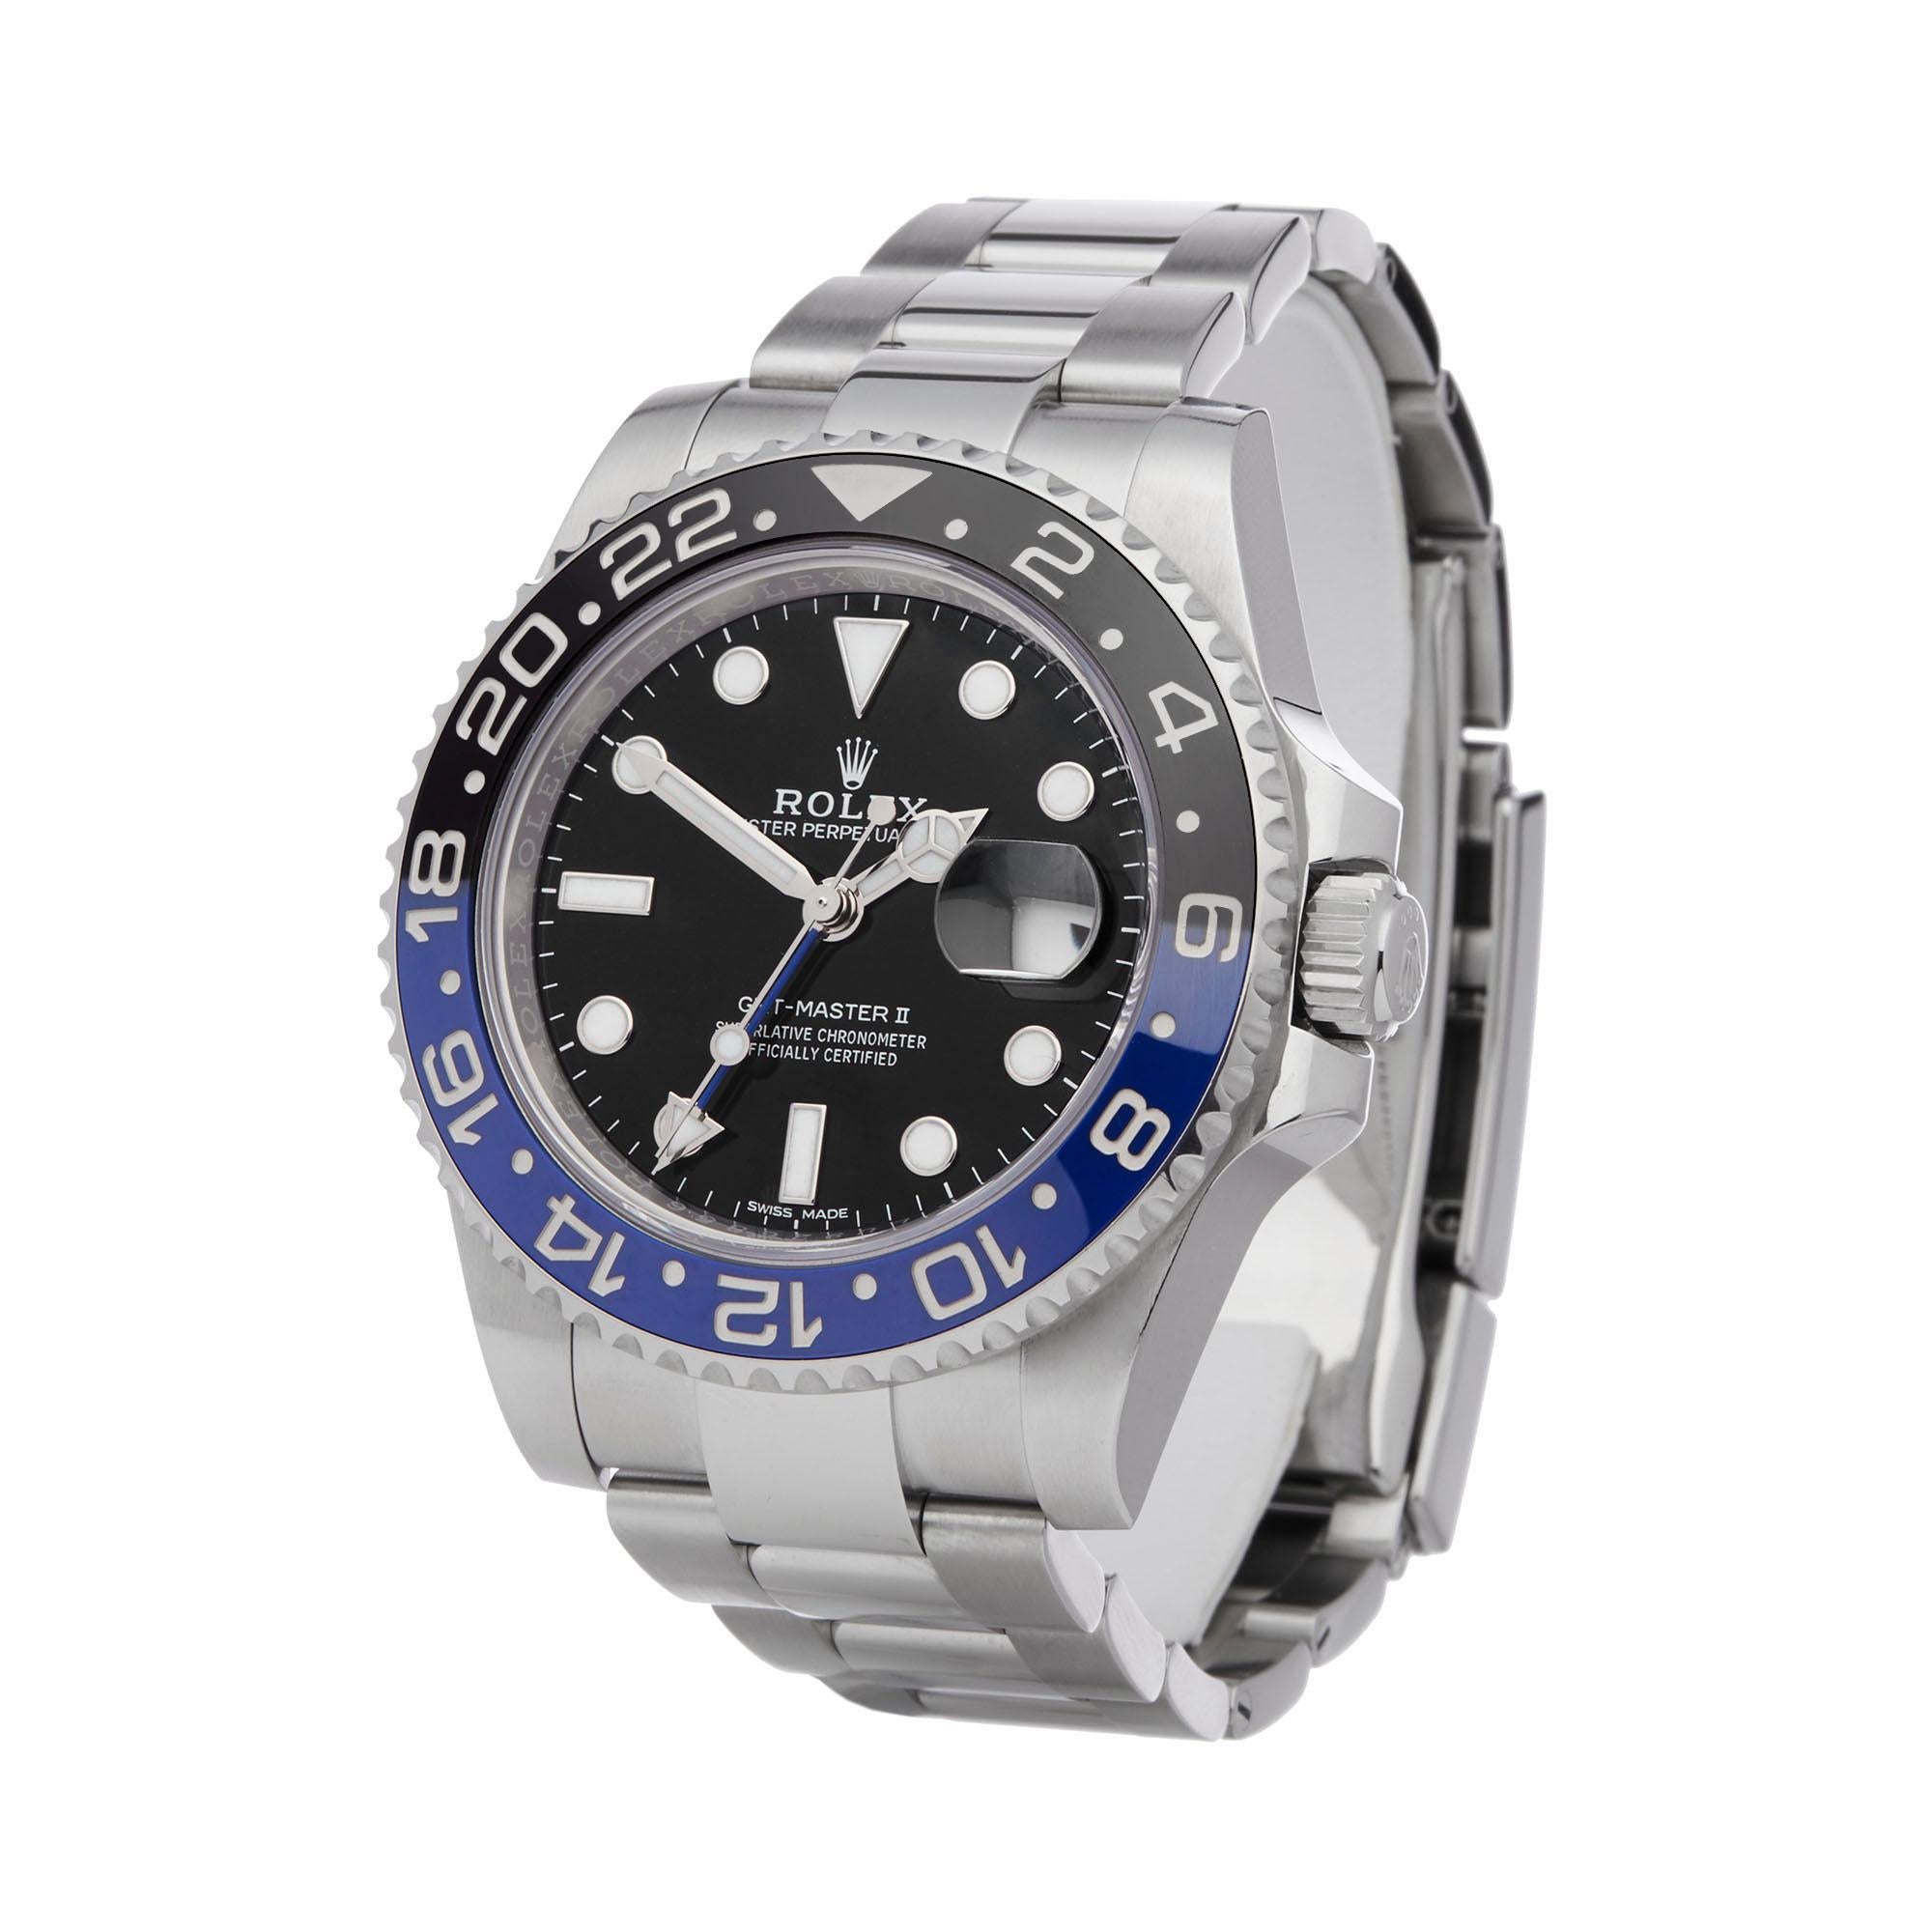 Ref: W6232
Manufacturer: Rolex
Model: GMT-Master II
Model Ref: 116710BLNR
Age: 13th May 2016
Gender: Mens
Complete With: Box, Guarantee & Swing Tag
Dial: Black Other
Glass: Sapphire Crystal
Movement: Automatic
Water Resistance: To Manufacturers